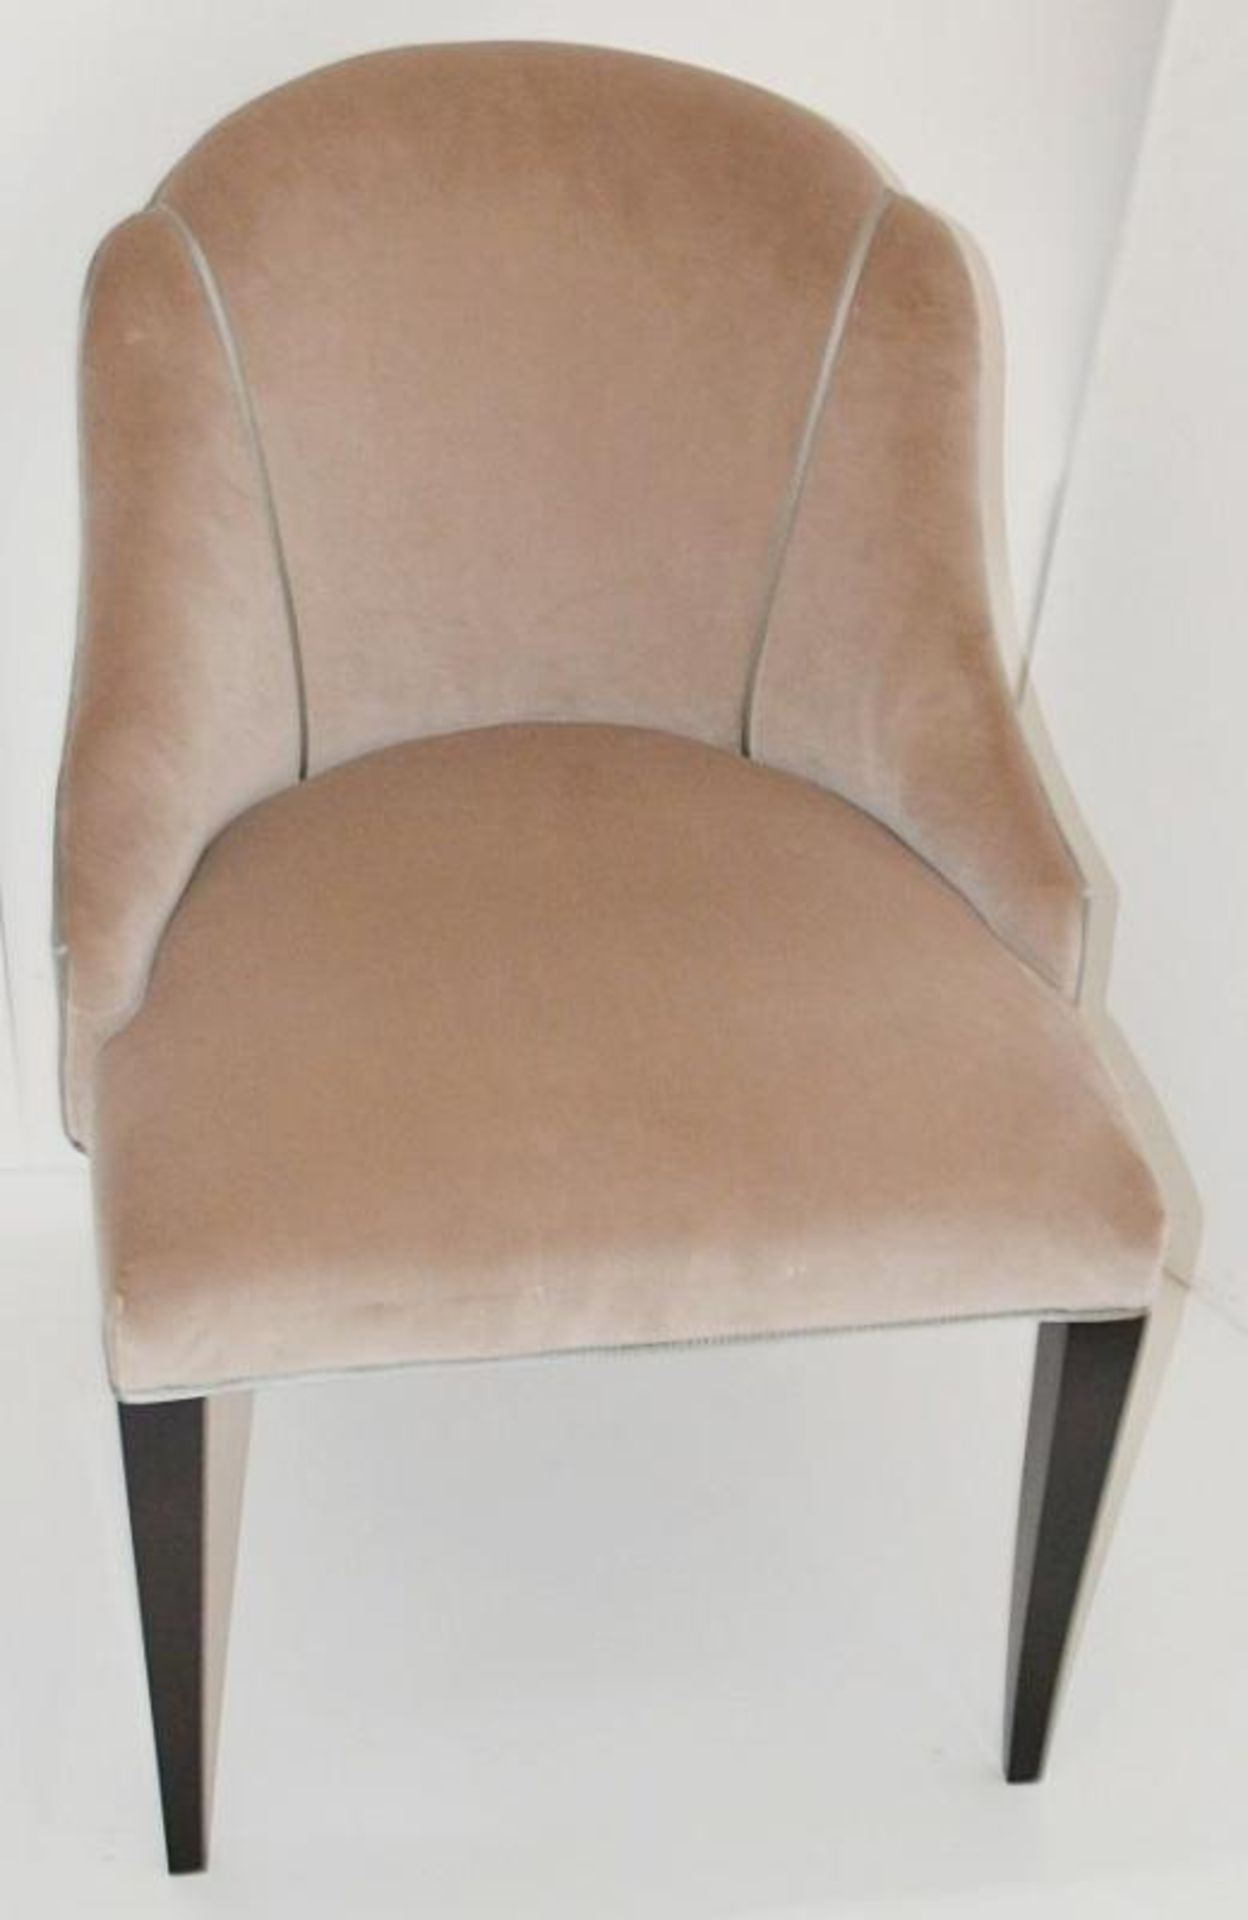 1 x REED &amp; RACKSTRAW "Cloud" Handcrafted Velvet Upholstered Chair - Dimensions: H87 x W58 x D5 - Image 12 of 14